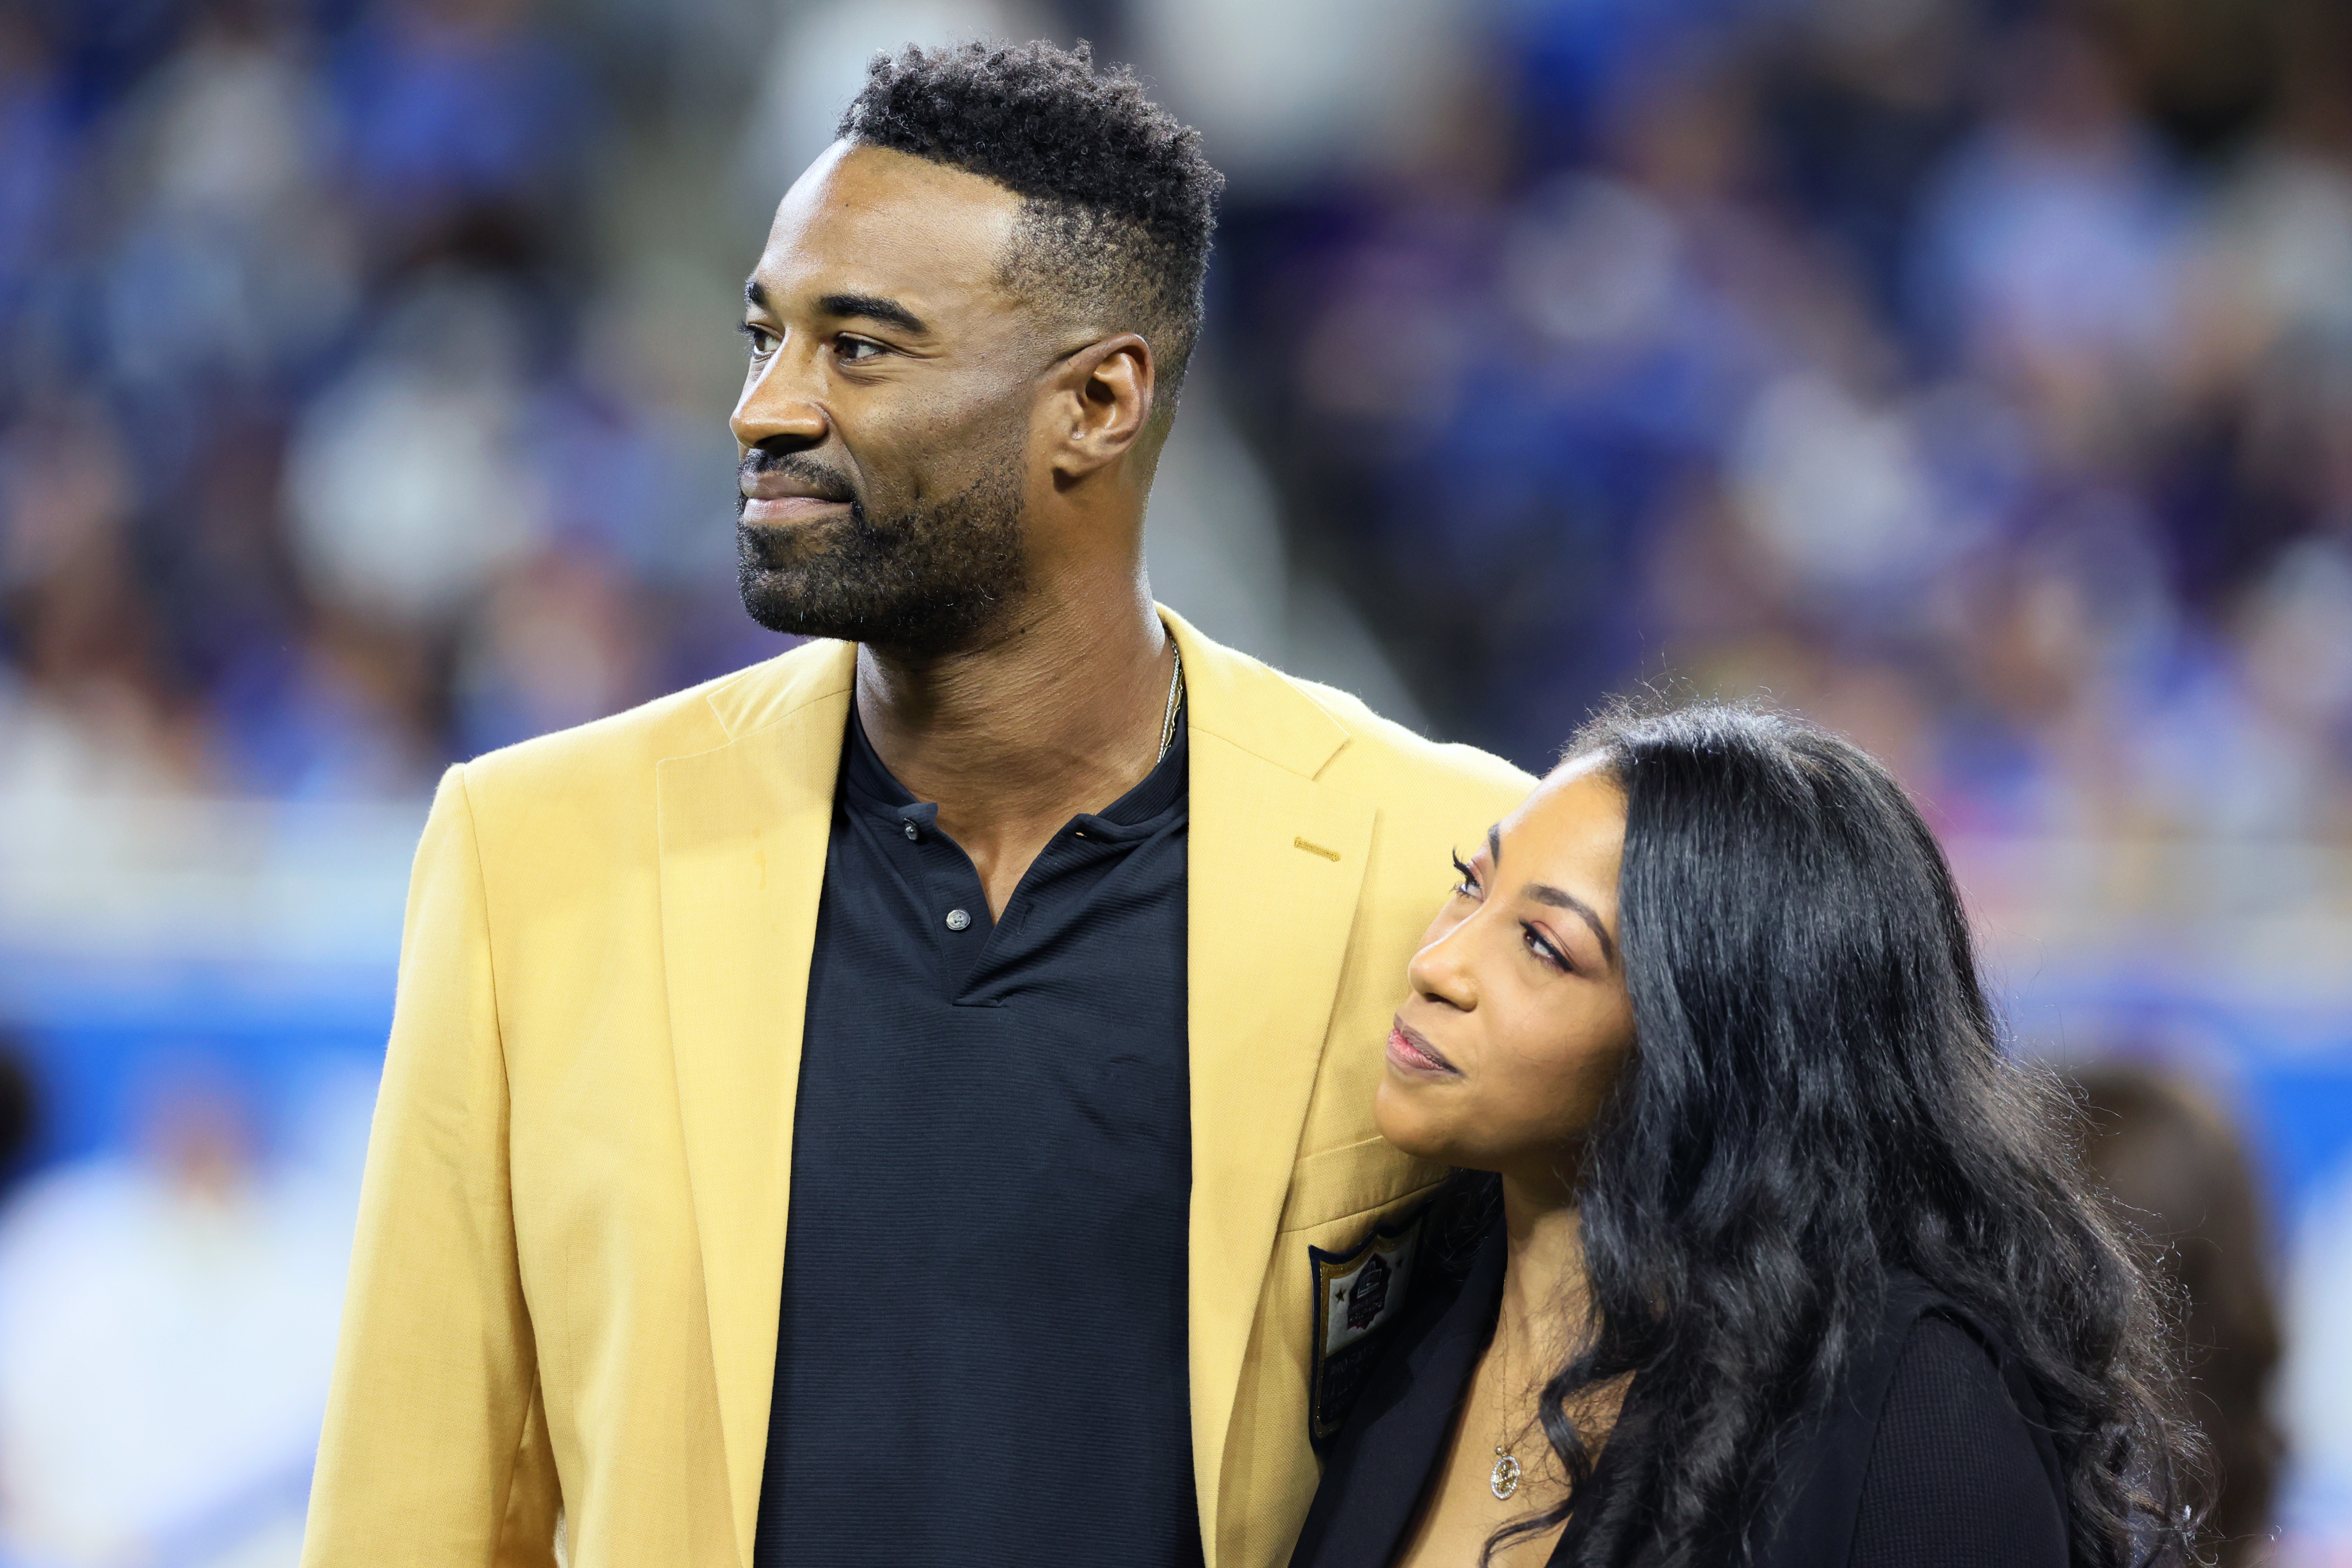 Calvin Johnson, Jr. stands with Brittney McNorton, as he is honored after his induction into the Hall of Fame in a special ceremony during halftime of an NFL football game between the Detroit Lions and the Baltimore Ravens on September 26, 2021, in Detroit, Michigan. | Source: Getty Images